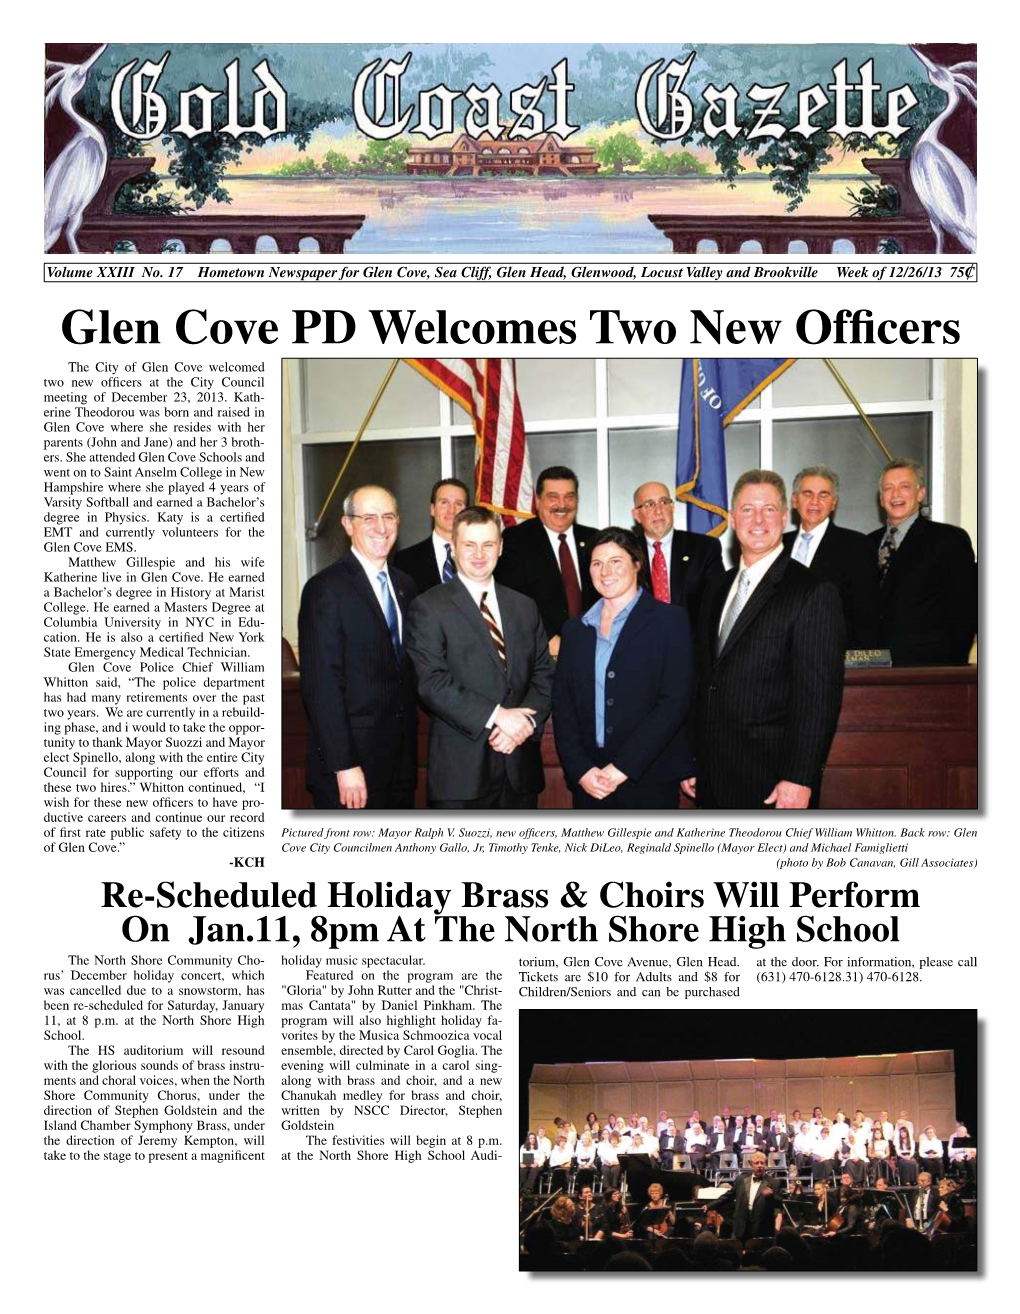 Glen Cove PD Welcomes Two New Officers